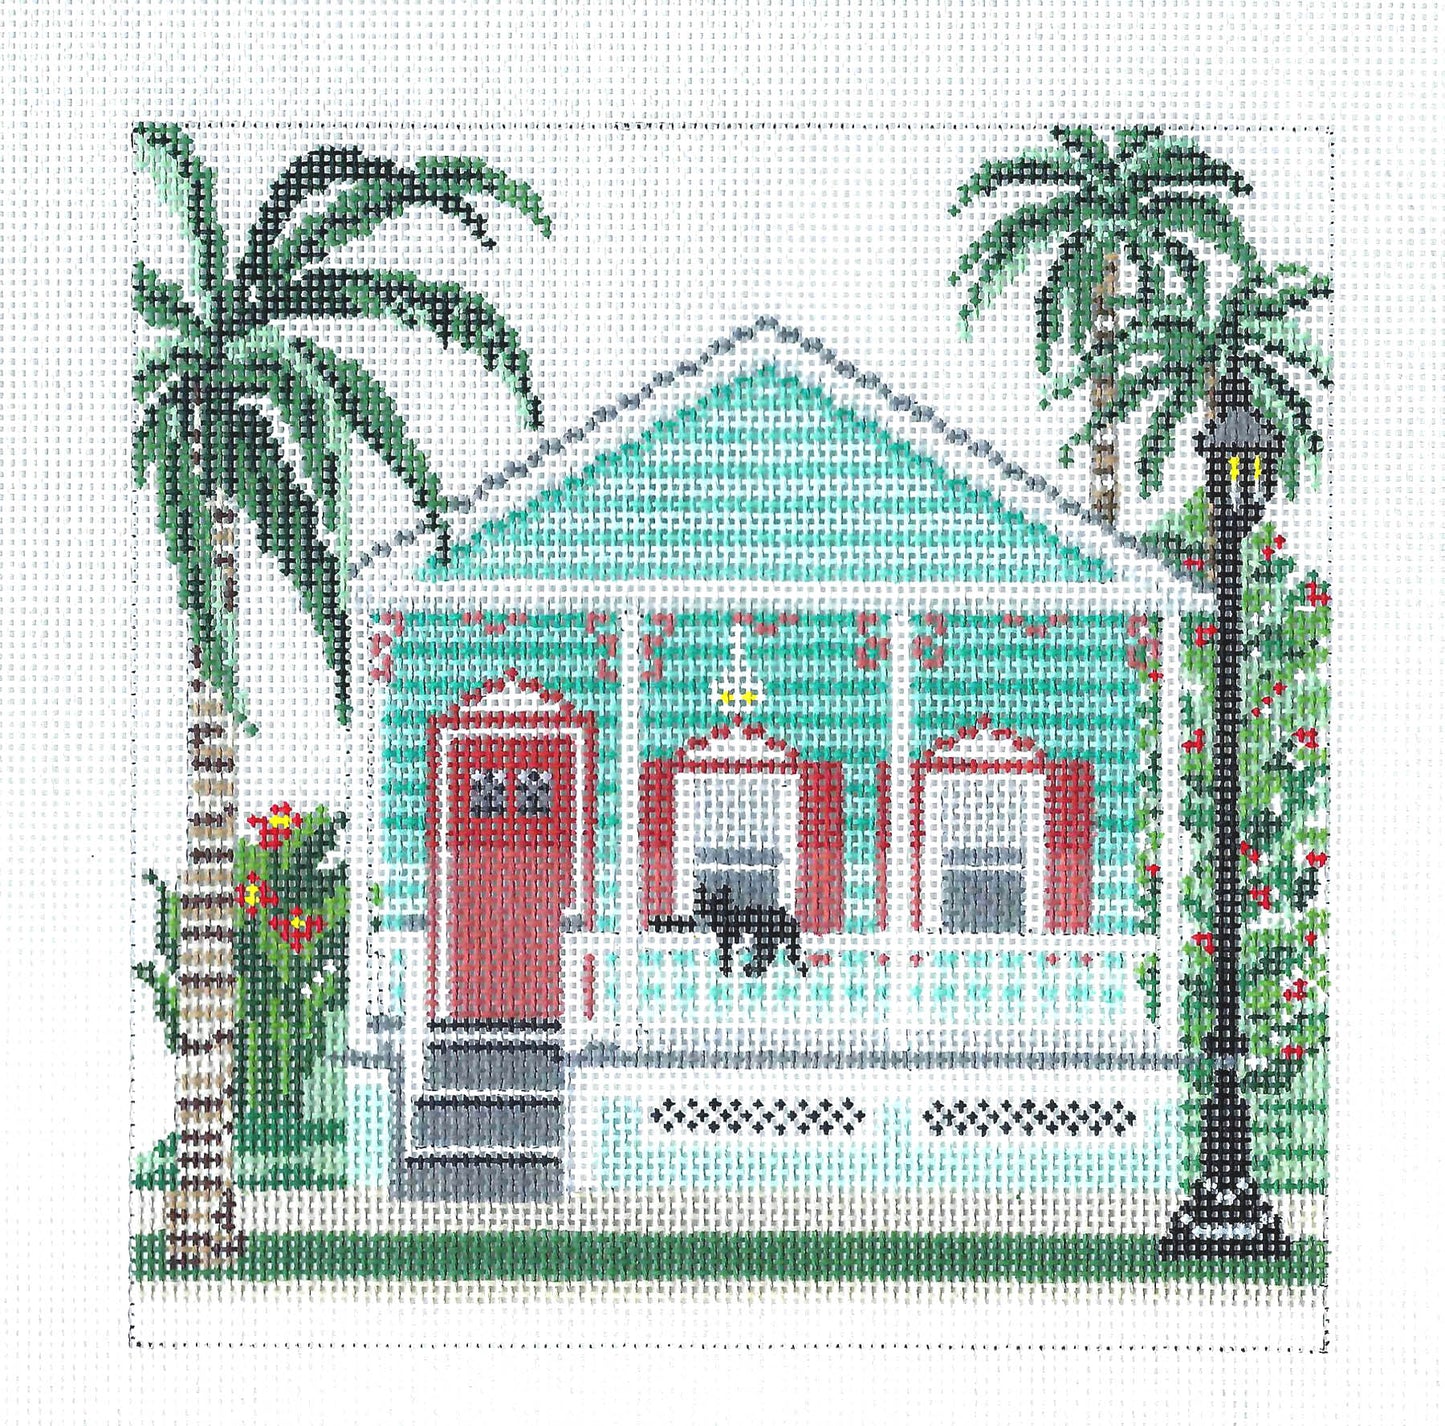 Tropical House ~ Key West Aqua Bungalow 6" Sq. handpainted 18 MESH Needlepoint Canvas by Needle Crossings